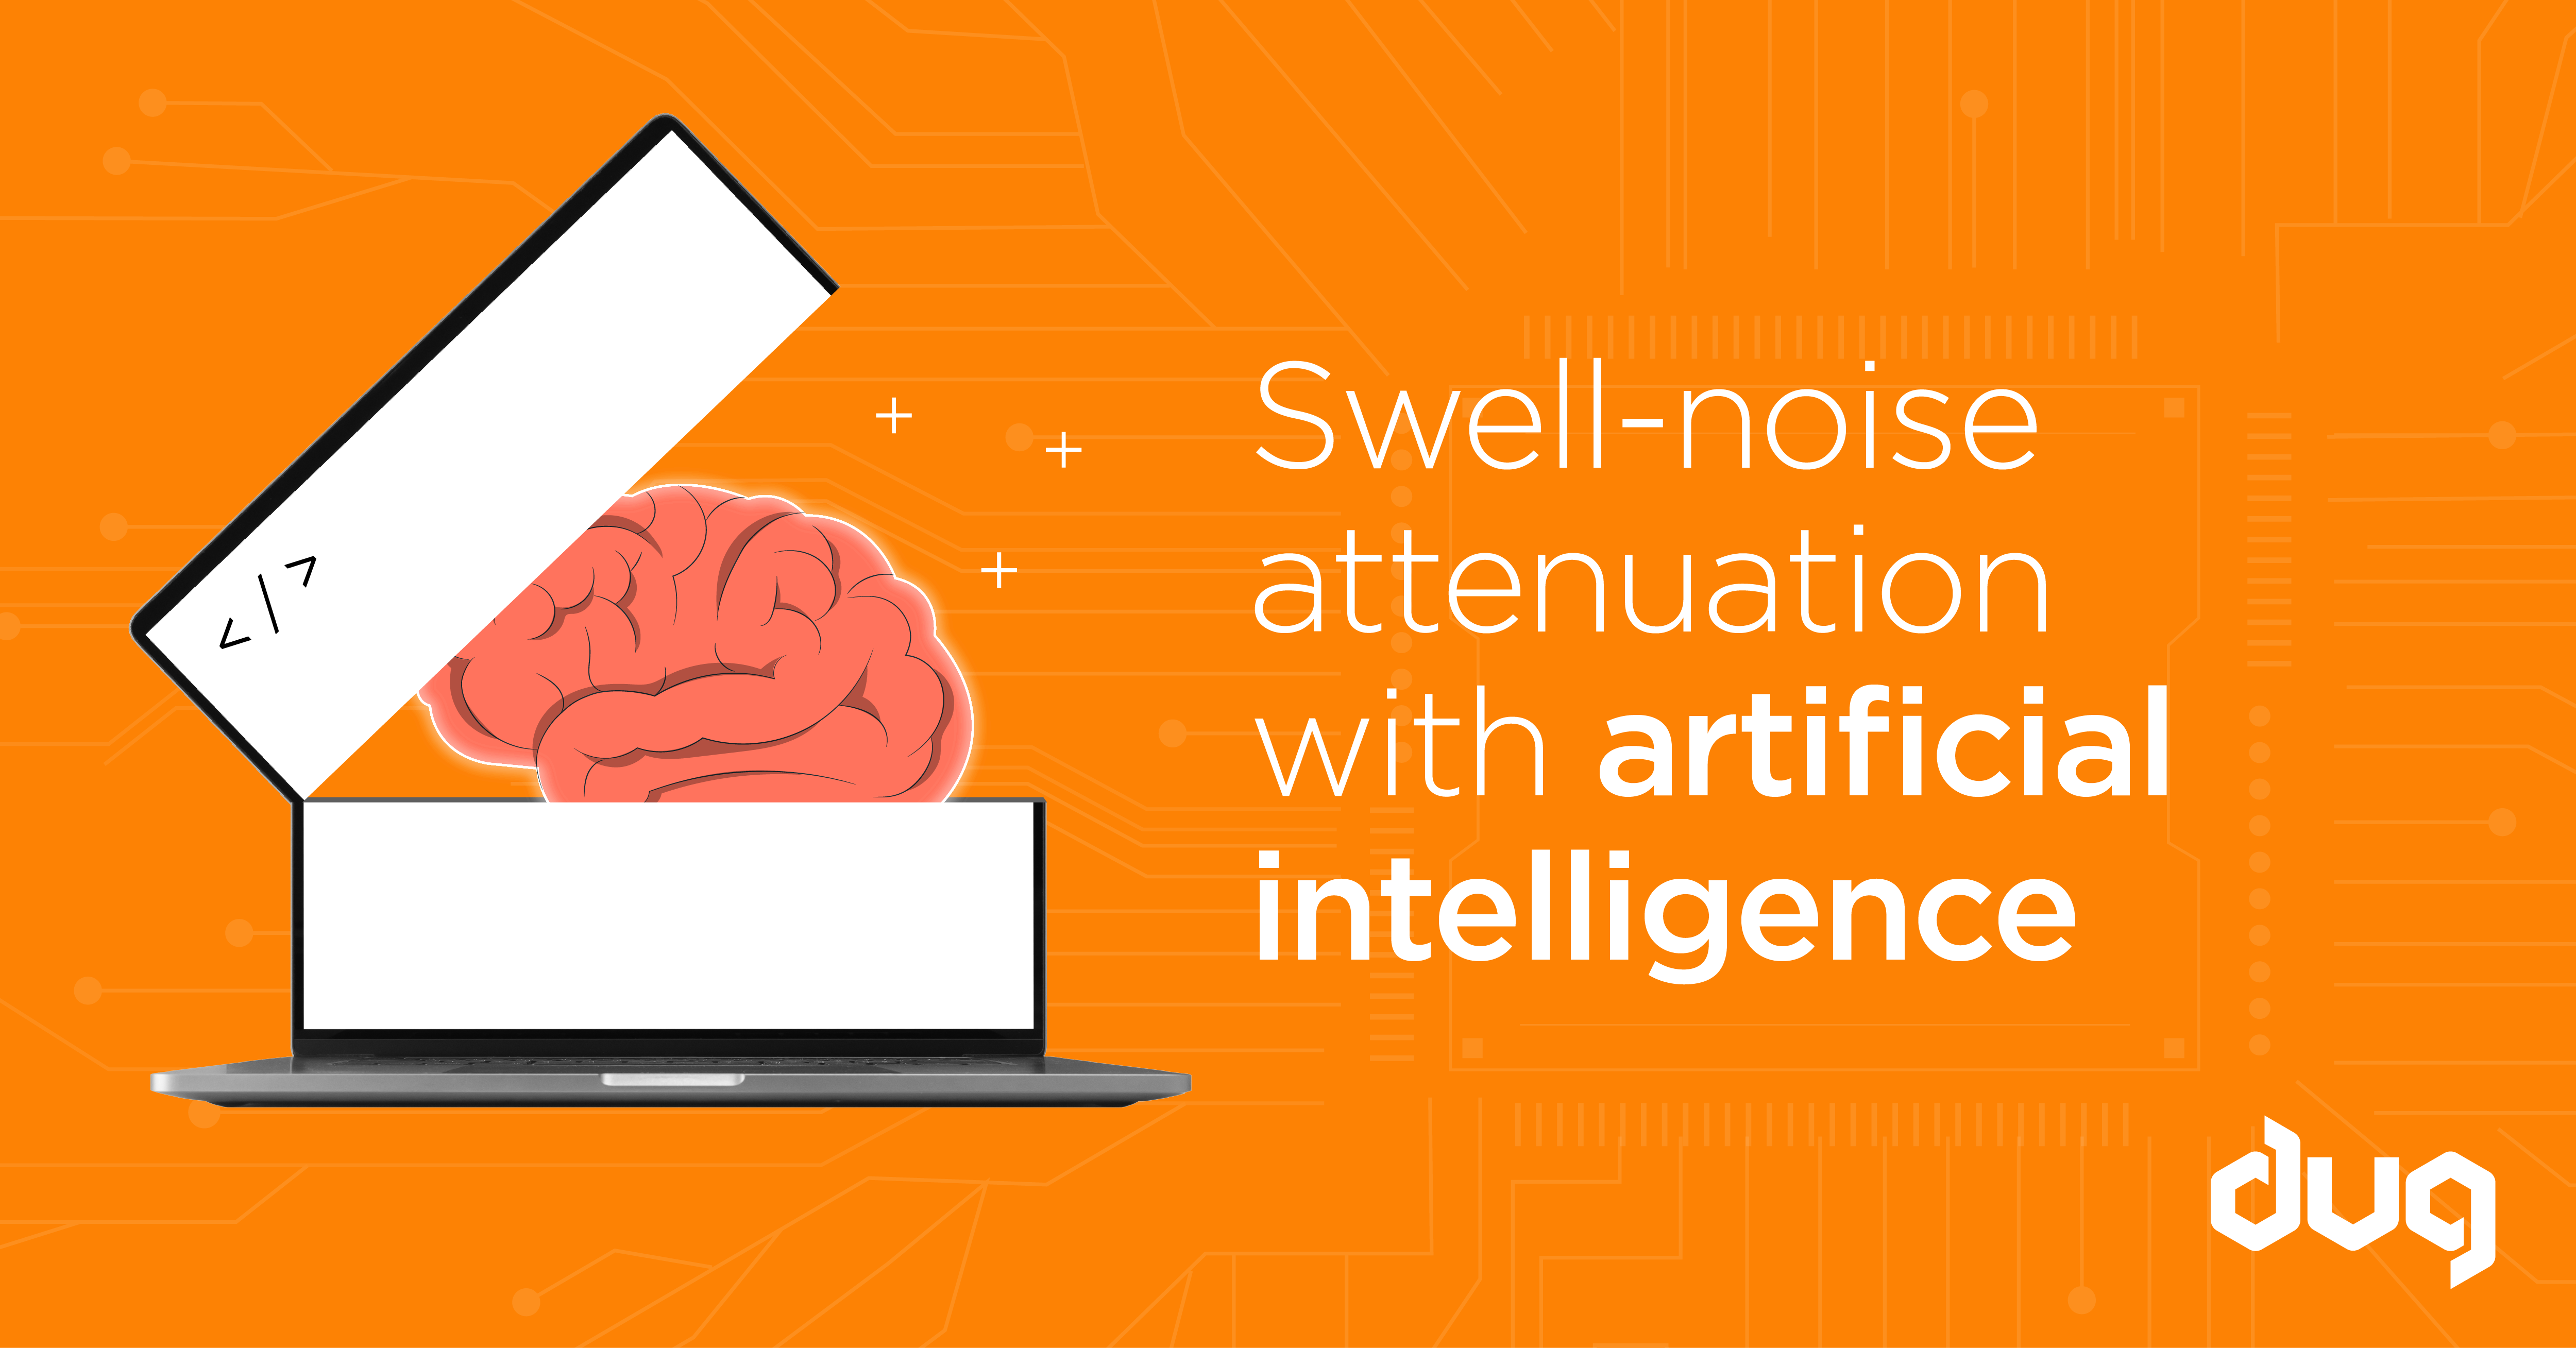 Swell-noise attenuation with artificial intelligence